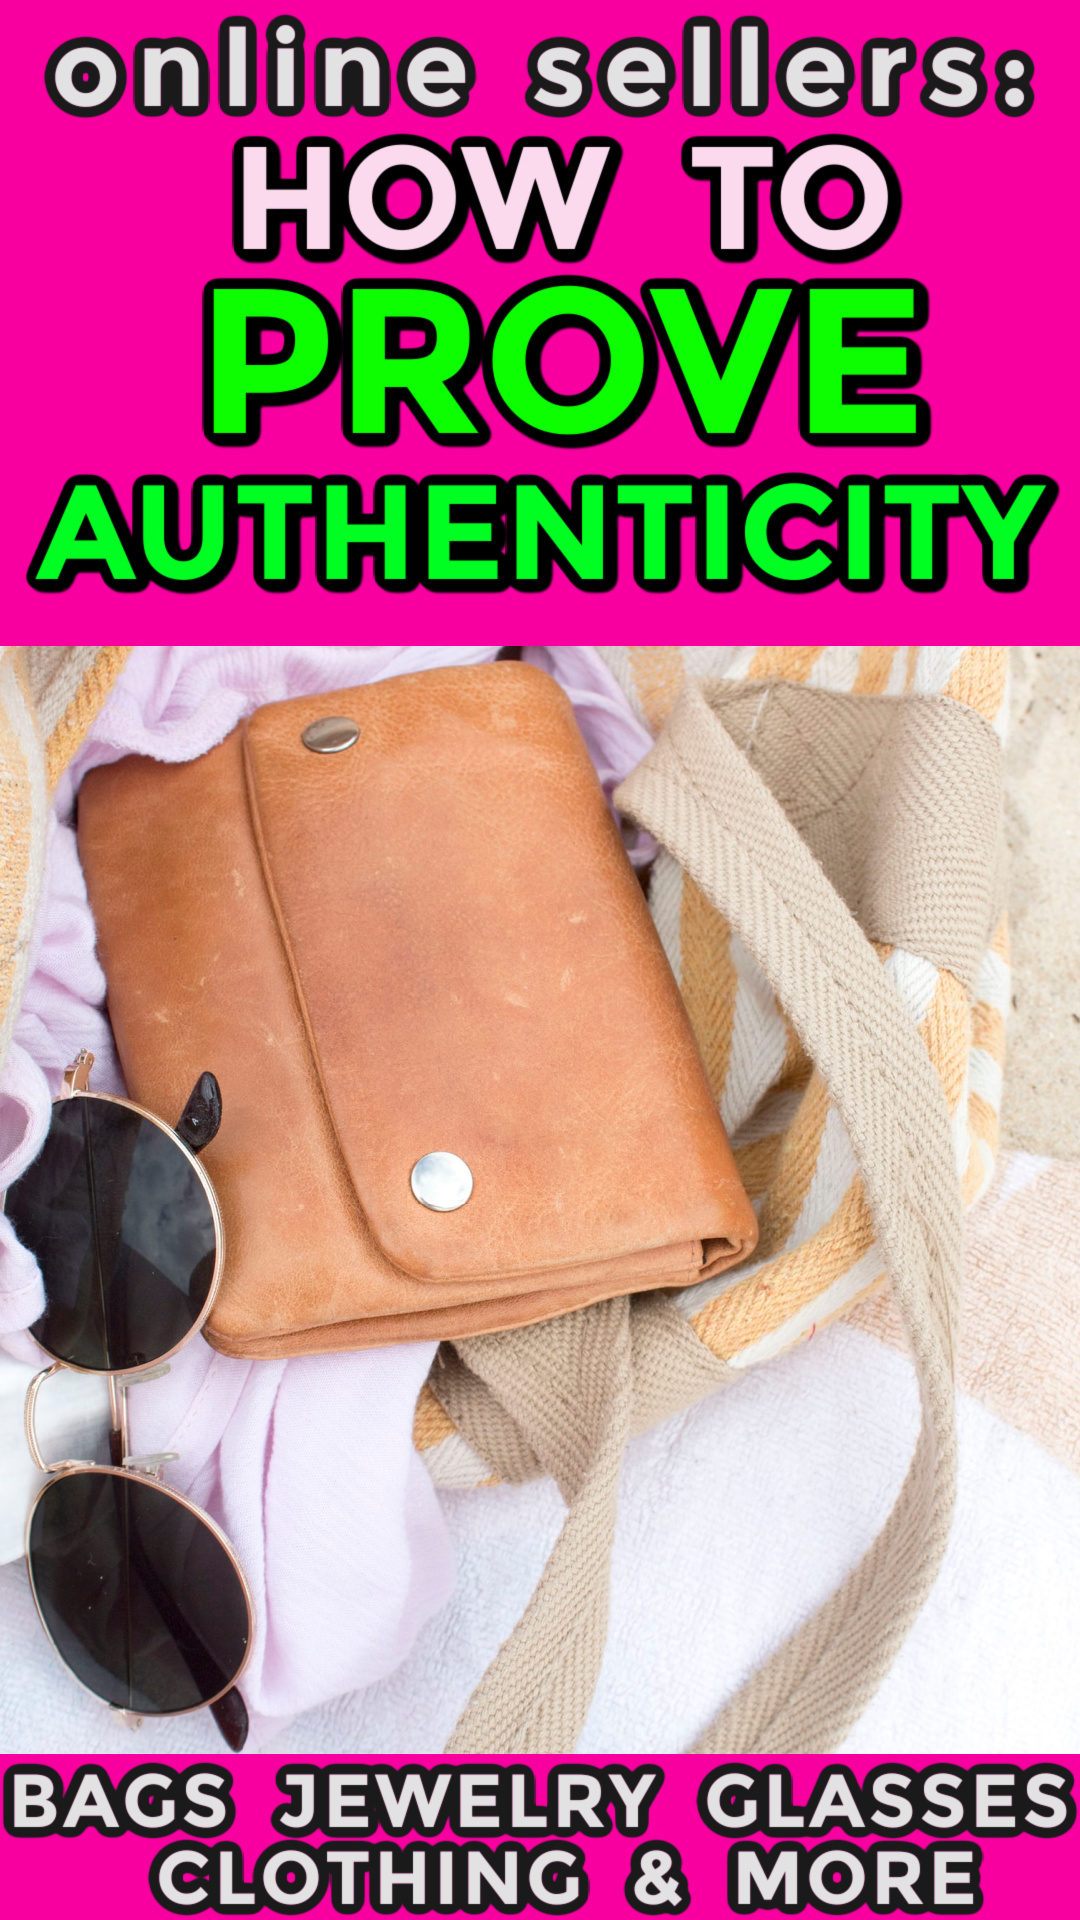 Certificate of Authenticity for Designer bags and accessories